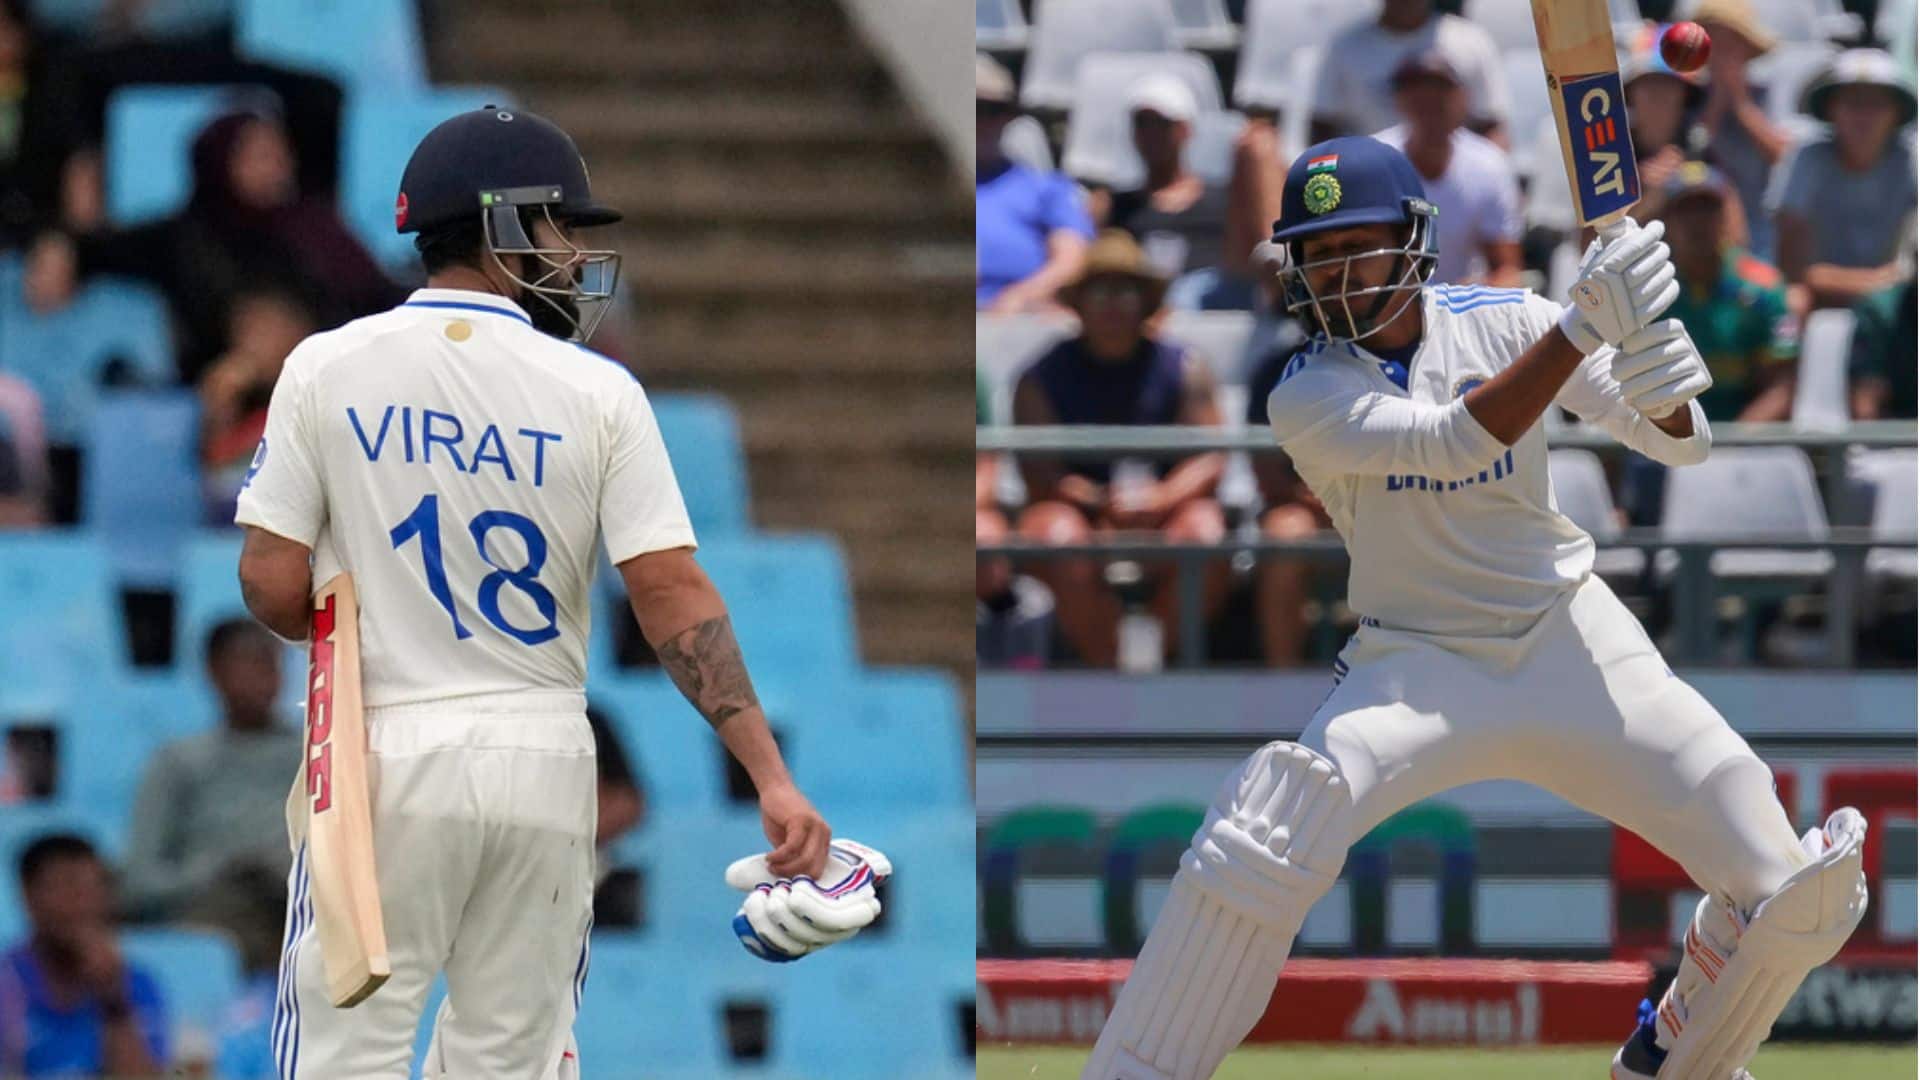 Virat Kohli Ruled Out, Shreyas Iyer In; Here’s India’s Probable Playing XI For 1st Test Vs ENG